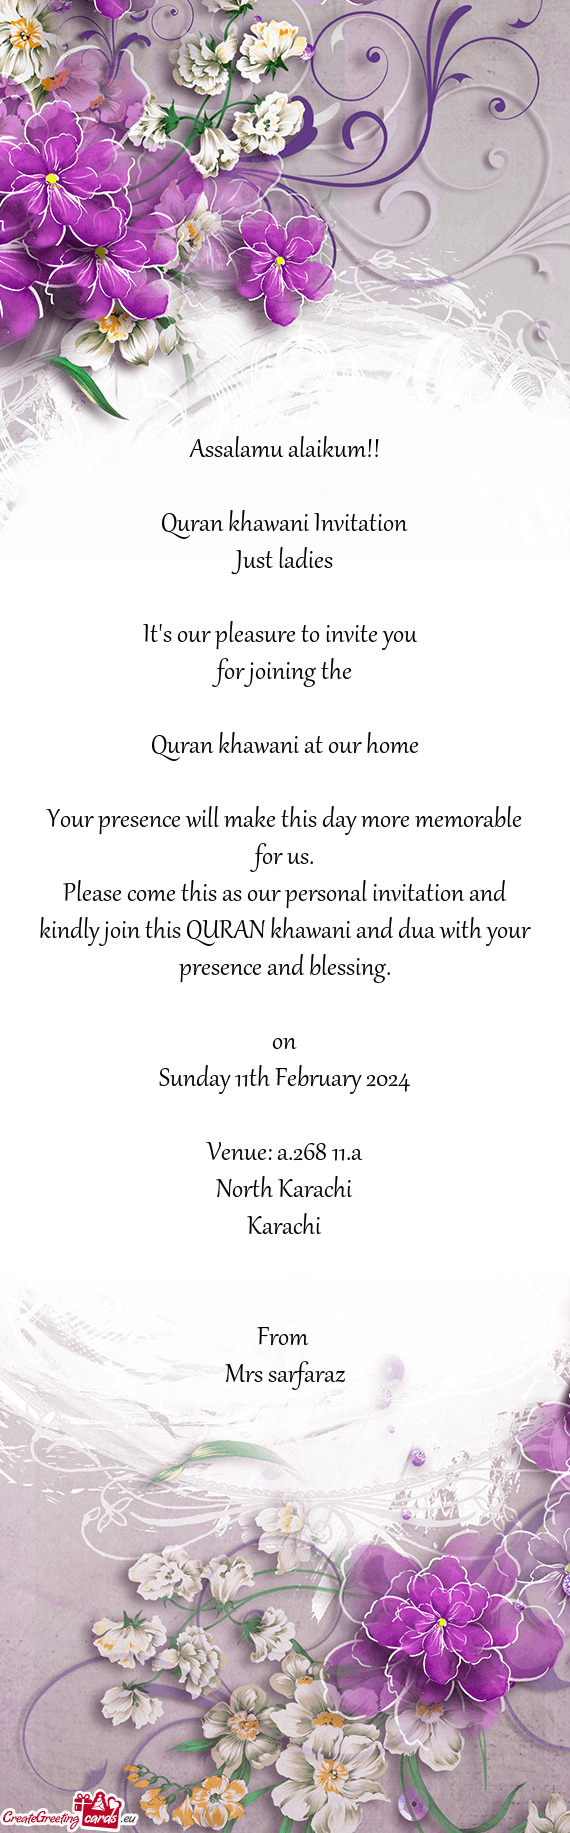 Please come this as our personal invitation and kindly join this QURAN khawani and dua with your pre